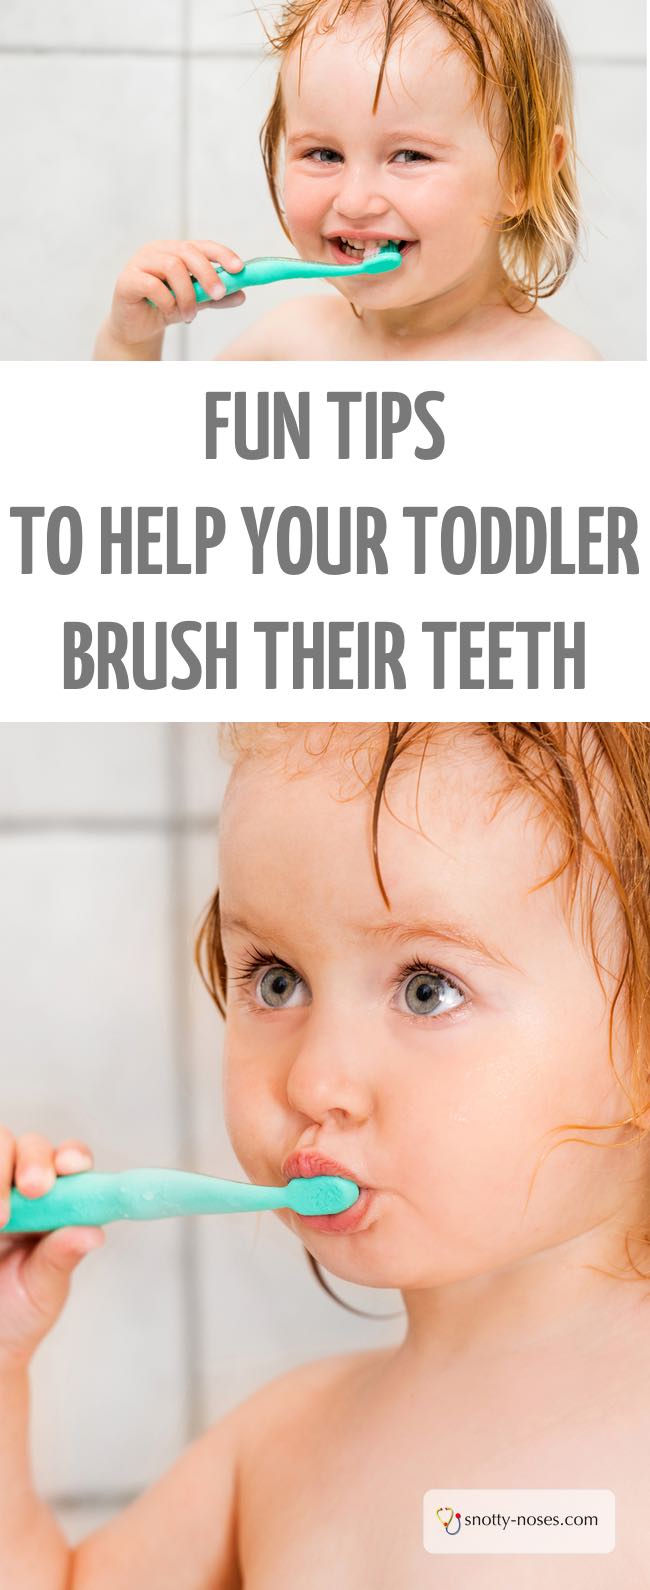 Fun Tips to Help you Brush Your Toddler's Teeth. Brushing your toddler's teeth can be so frustrating, here are 10 great tips to help. I love the last one! #toddler #parenting